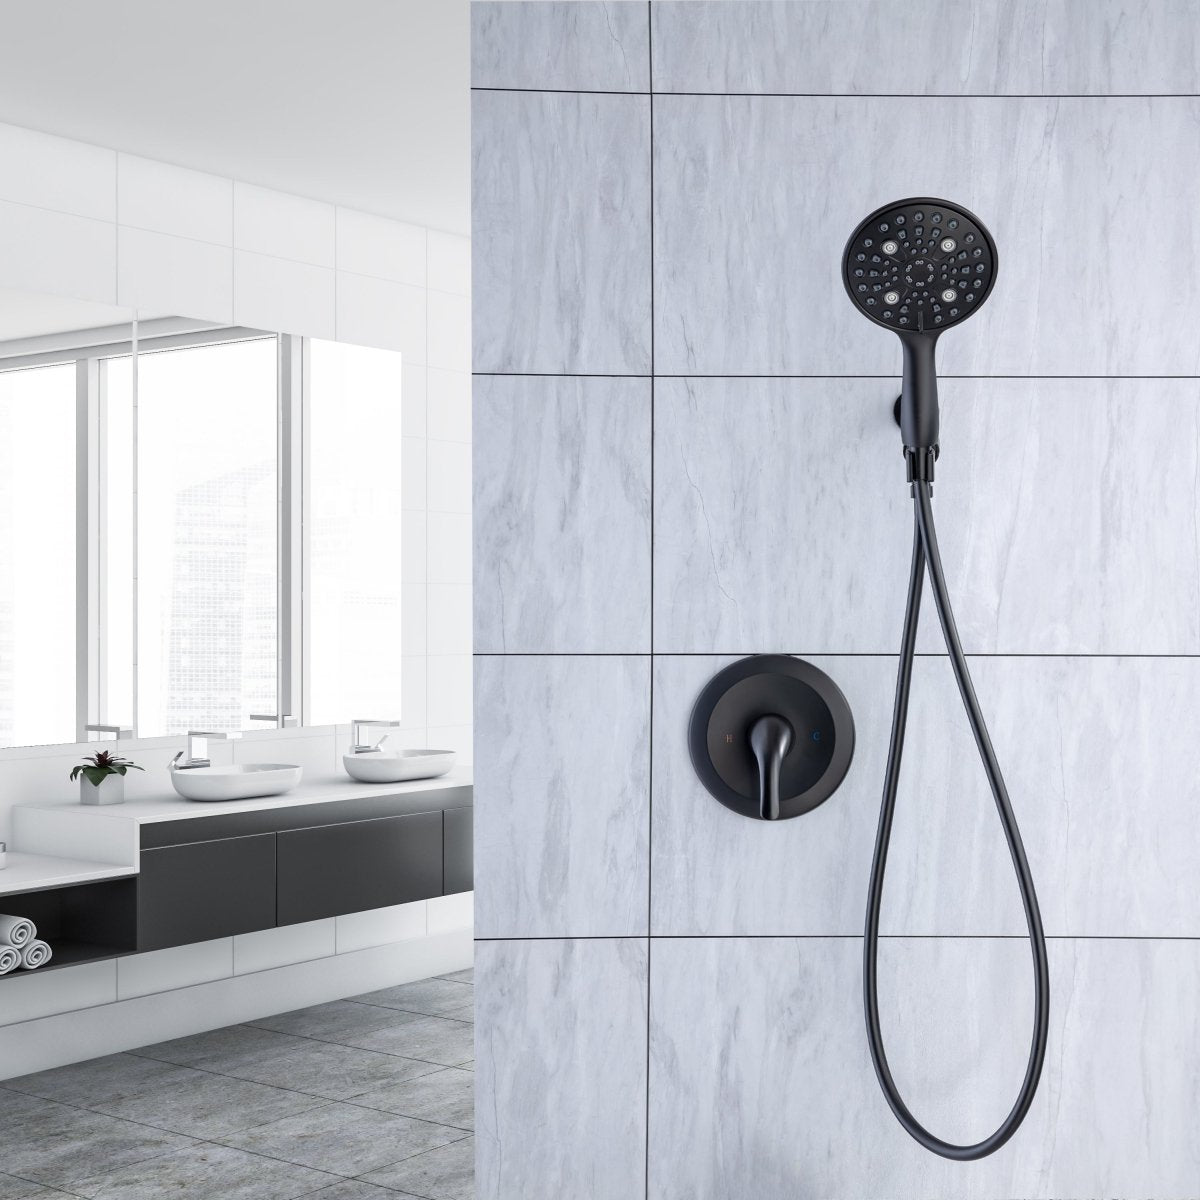 ExBrite 6 Inch Ceiling Mount Black Shower System Shower Combo Set Bathroom Wall Mount Mixer Shower Faucet Rough-In Valve and Shower Arm